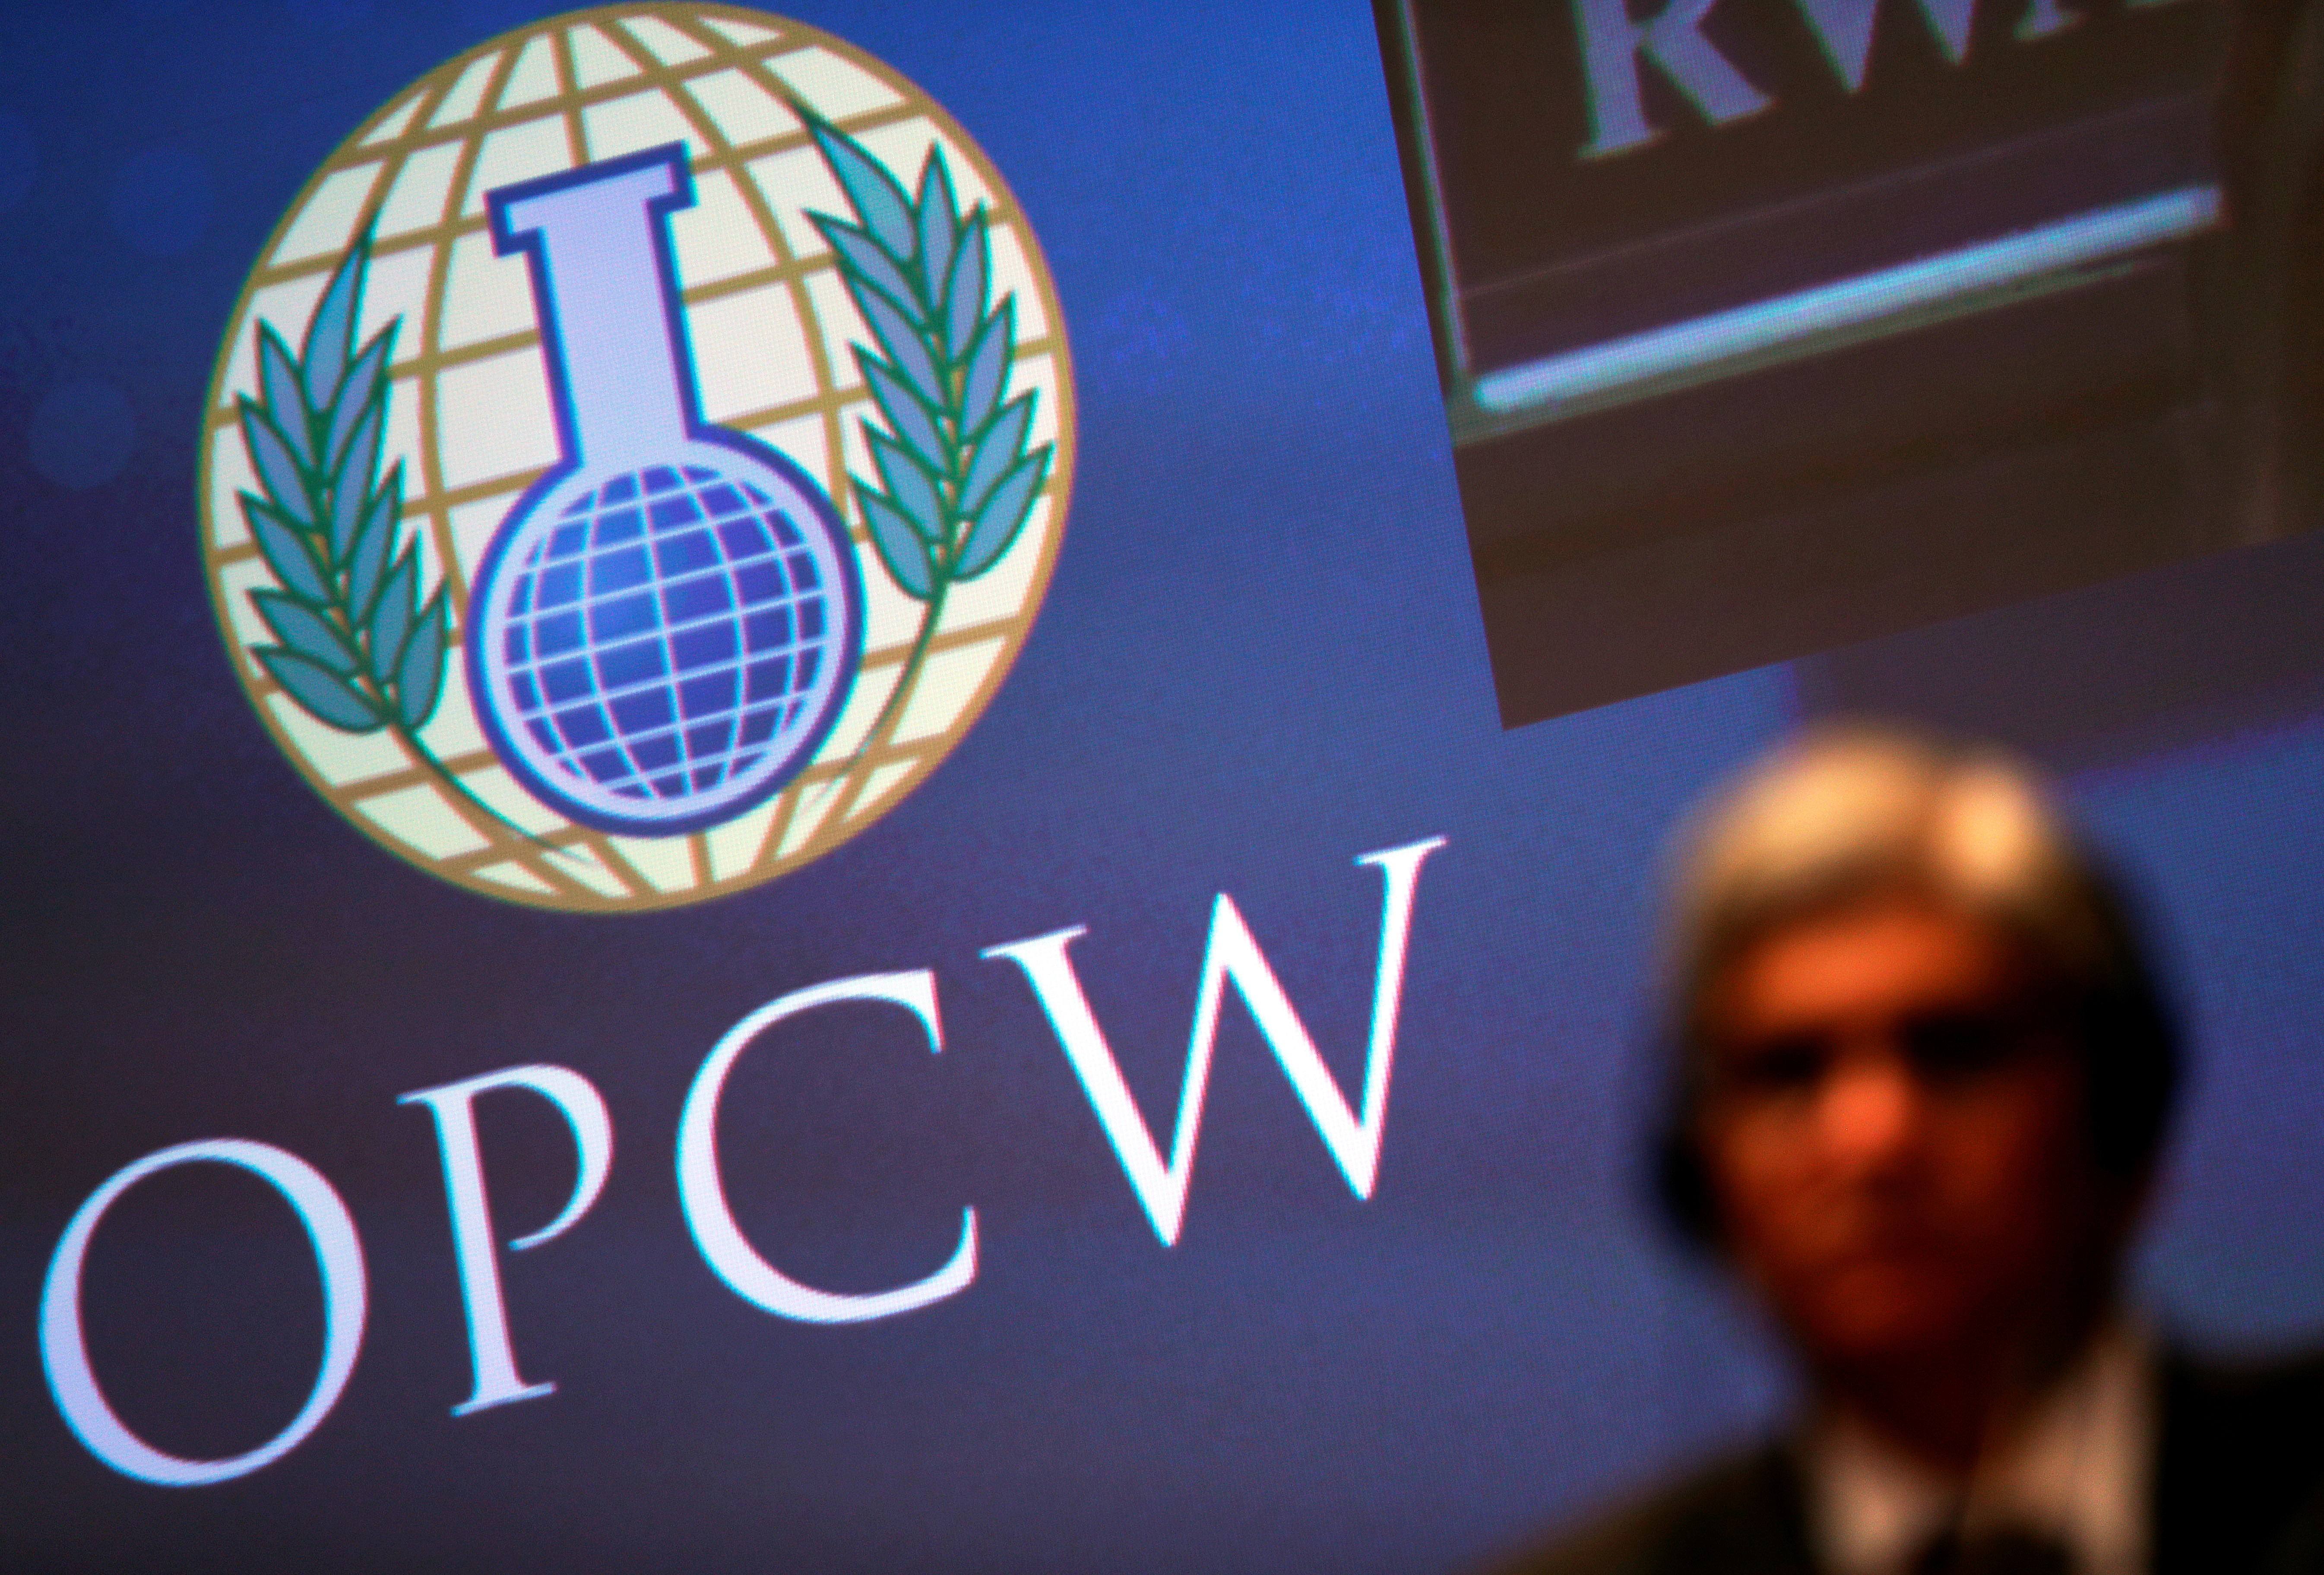 The logo of the Organisation for the Prohibition of Chemical Weapons is seen during a special session in the Hague,